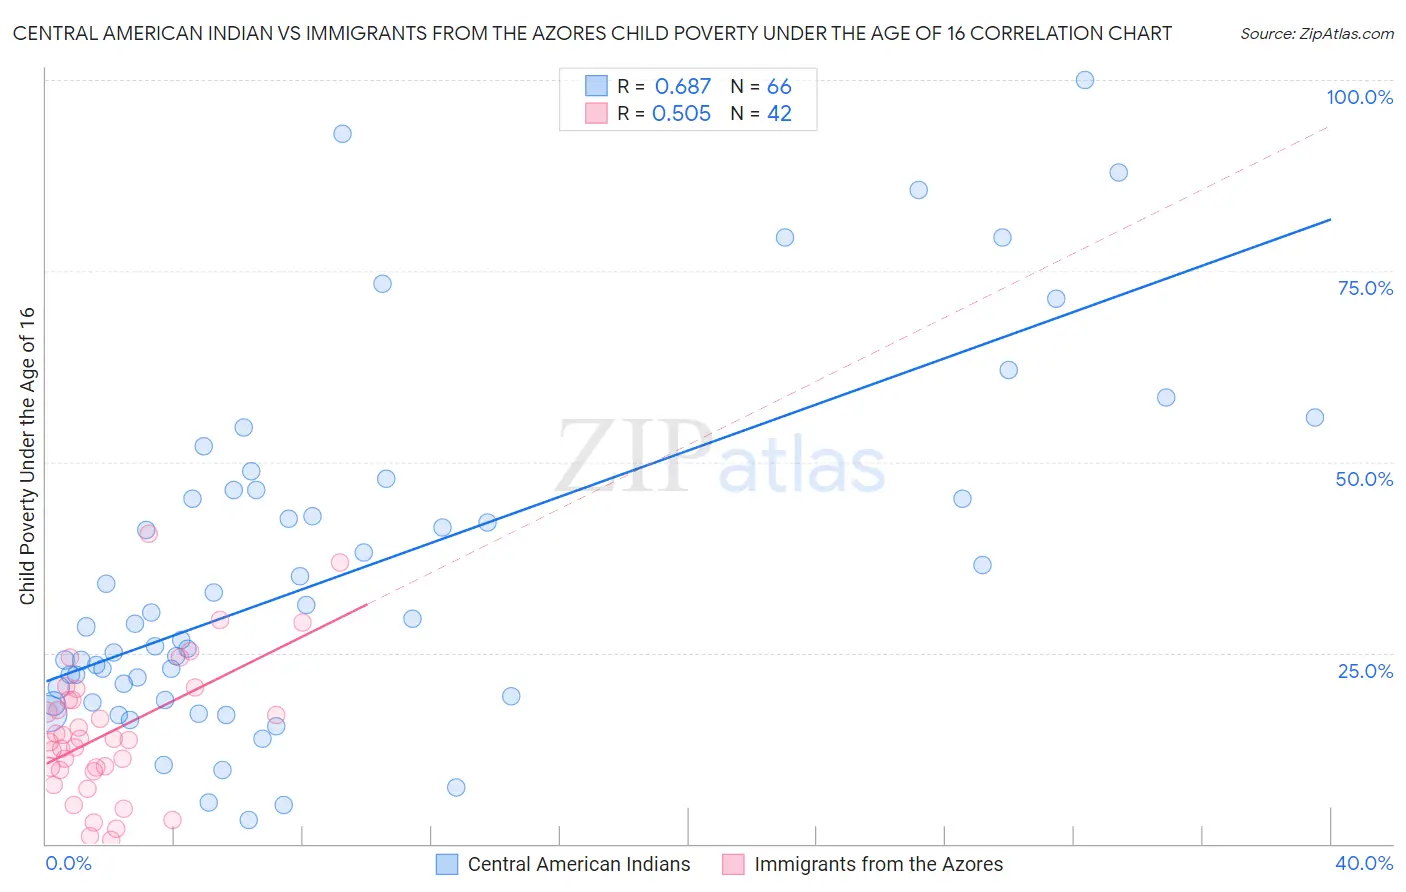 Central American Indian vs Immigrants from the Azores Child Poverty Under the Age of 16